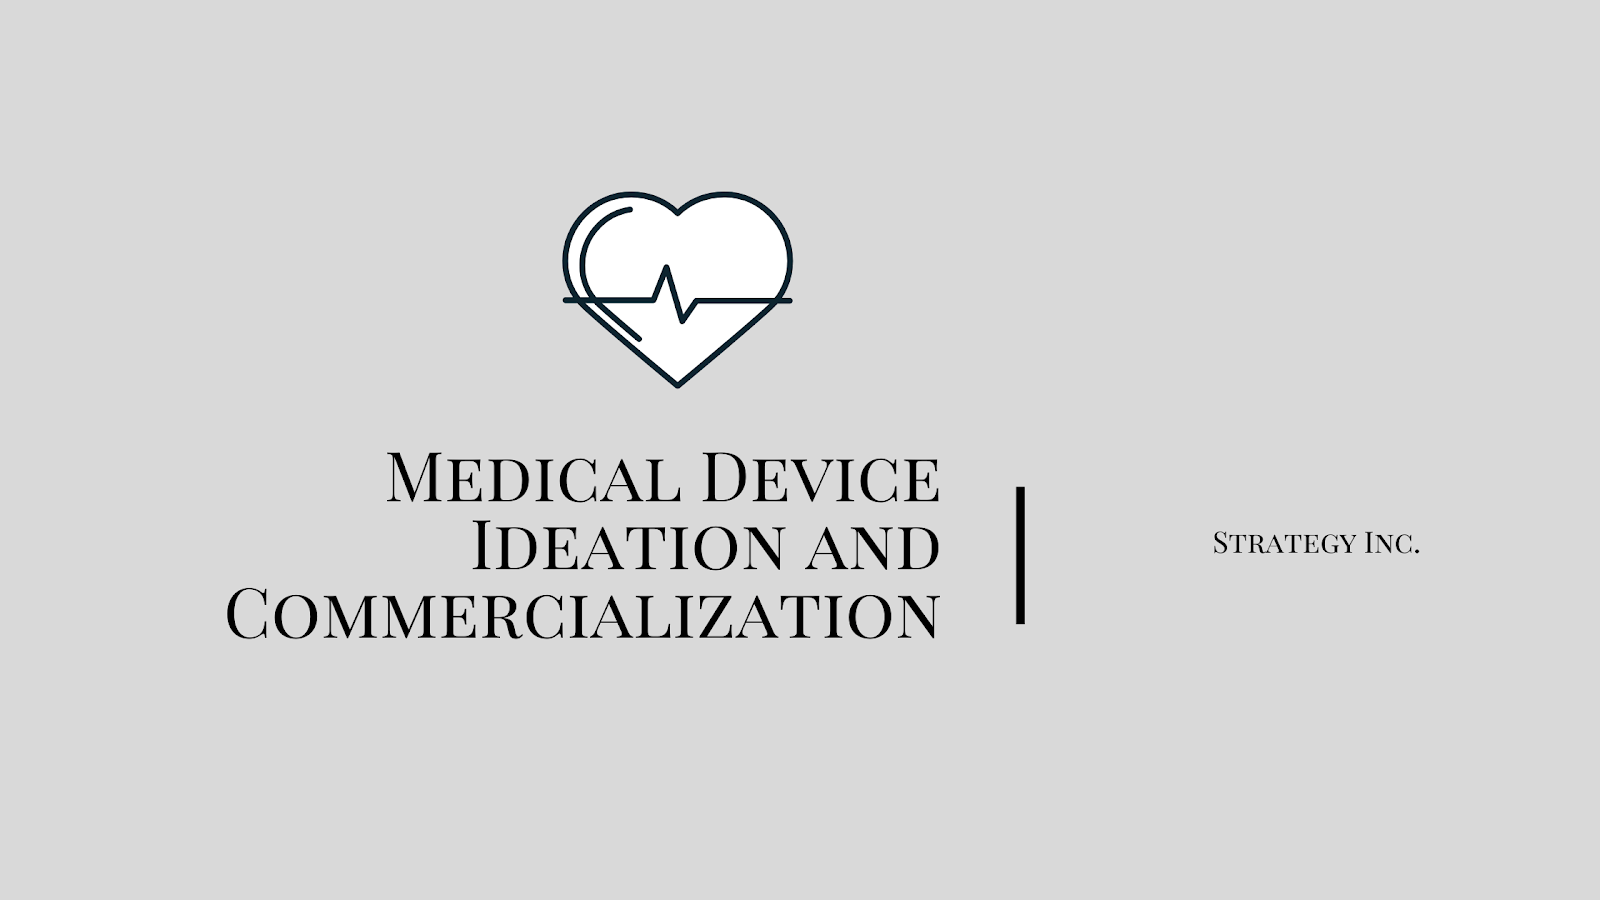 Medical Device Ideation and Commercialization